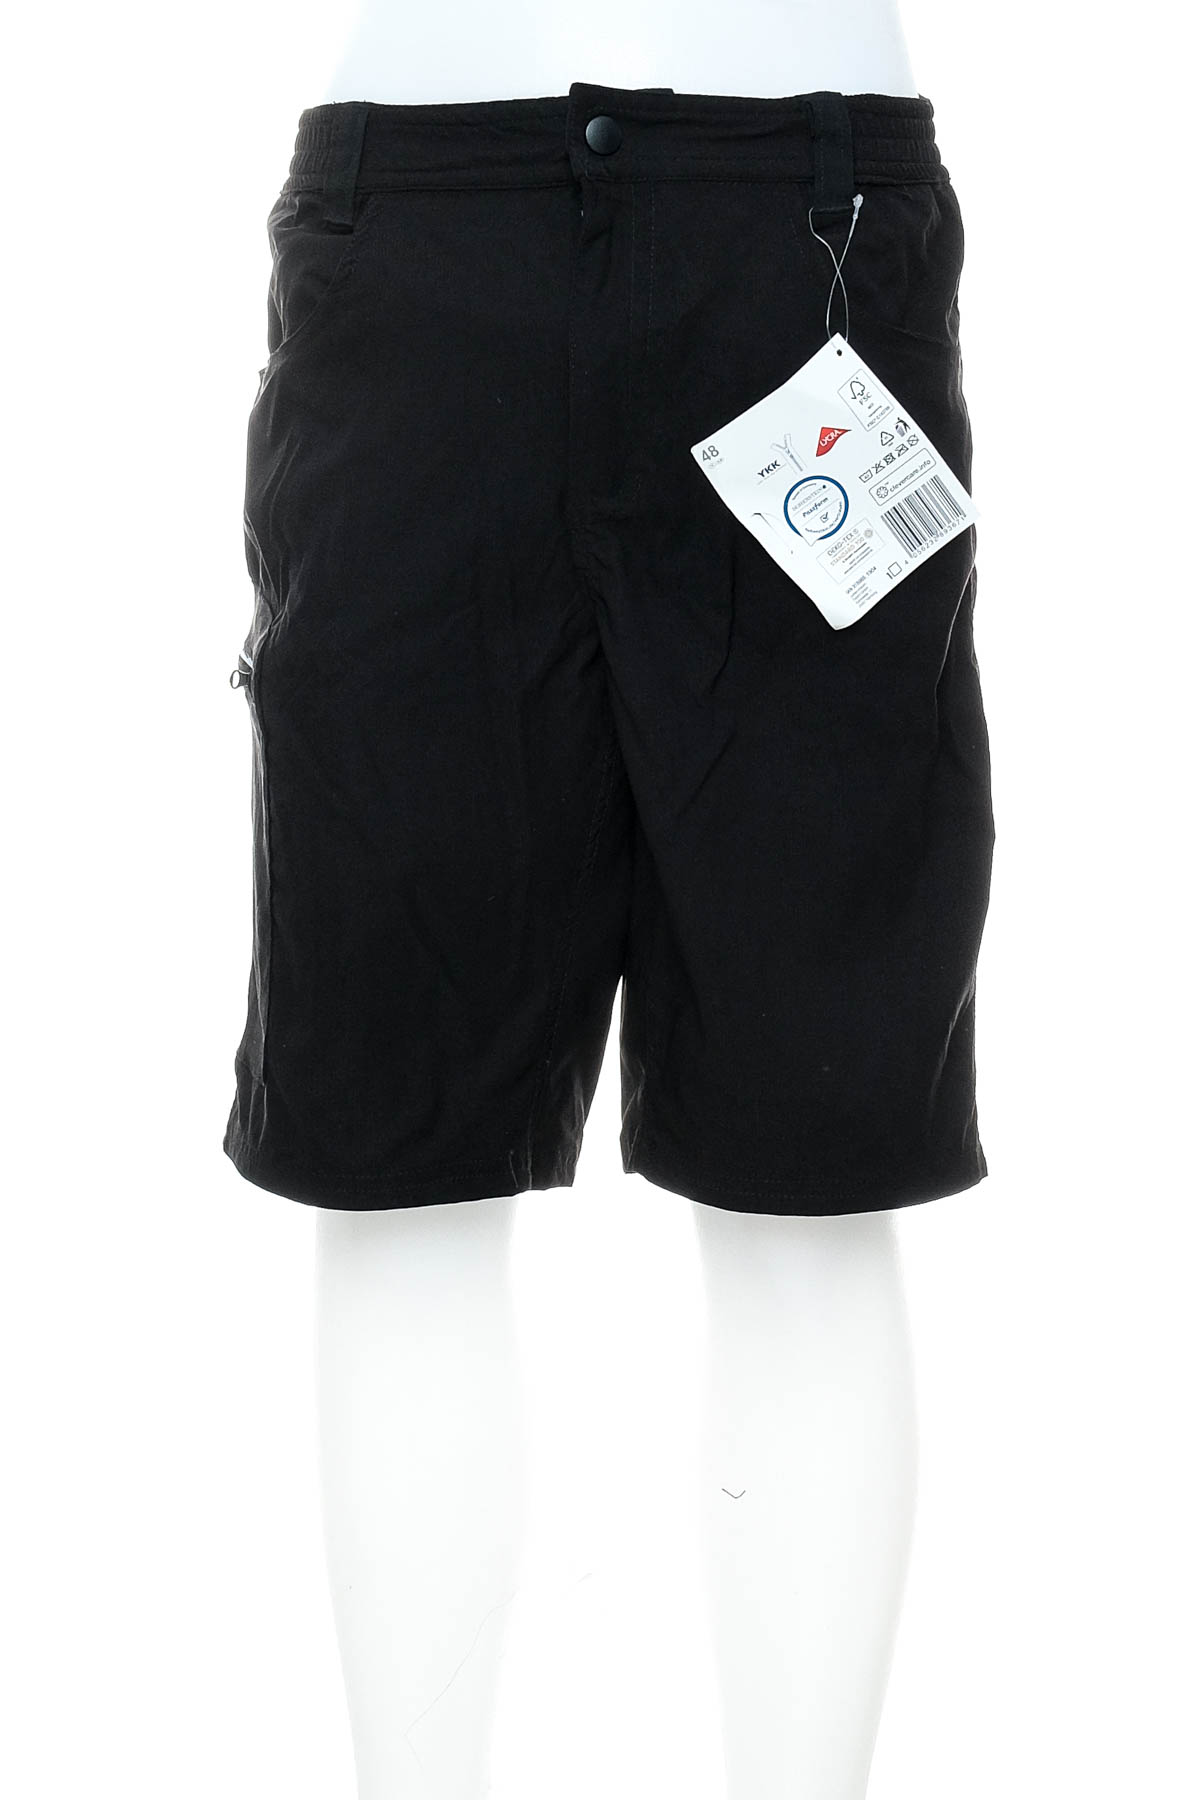 Men's shorts for cycling - Crivit - 0